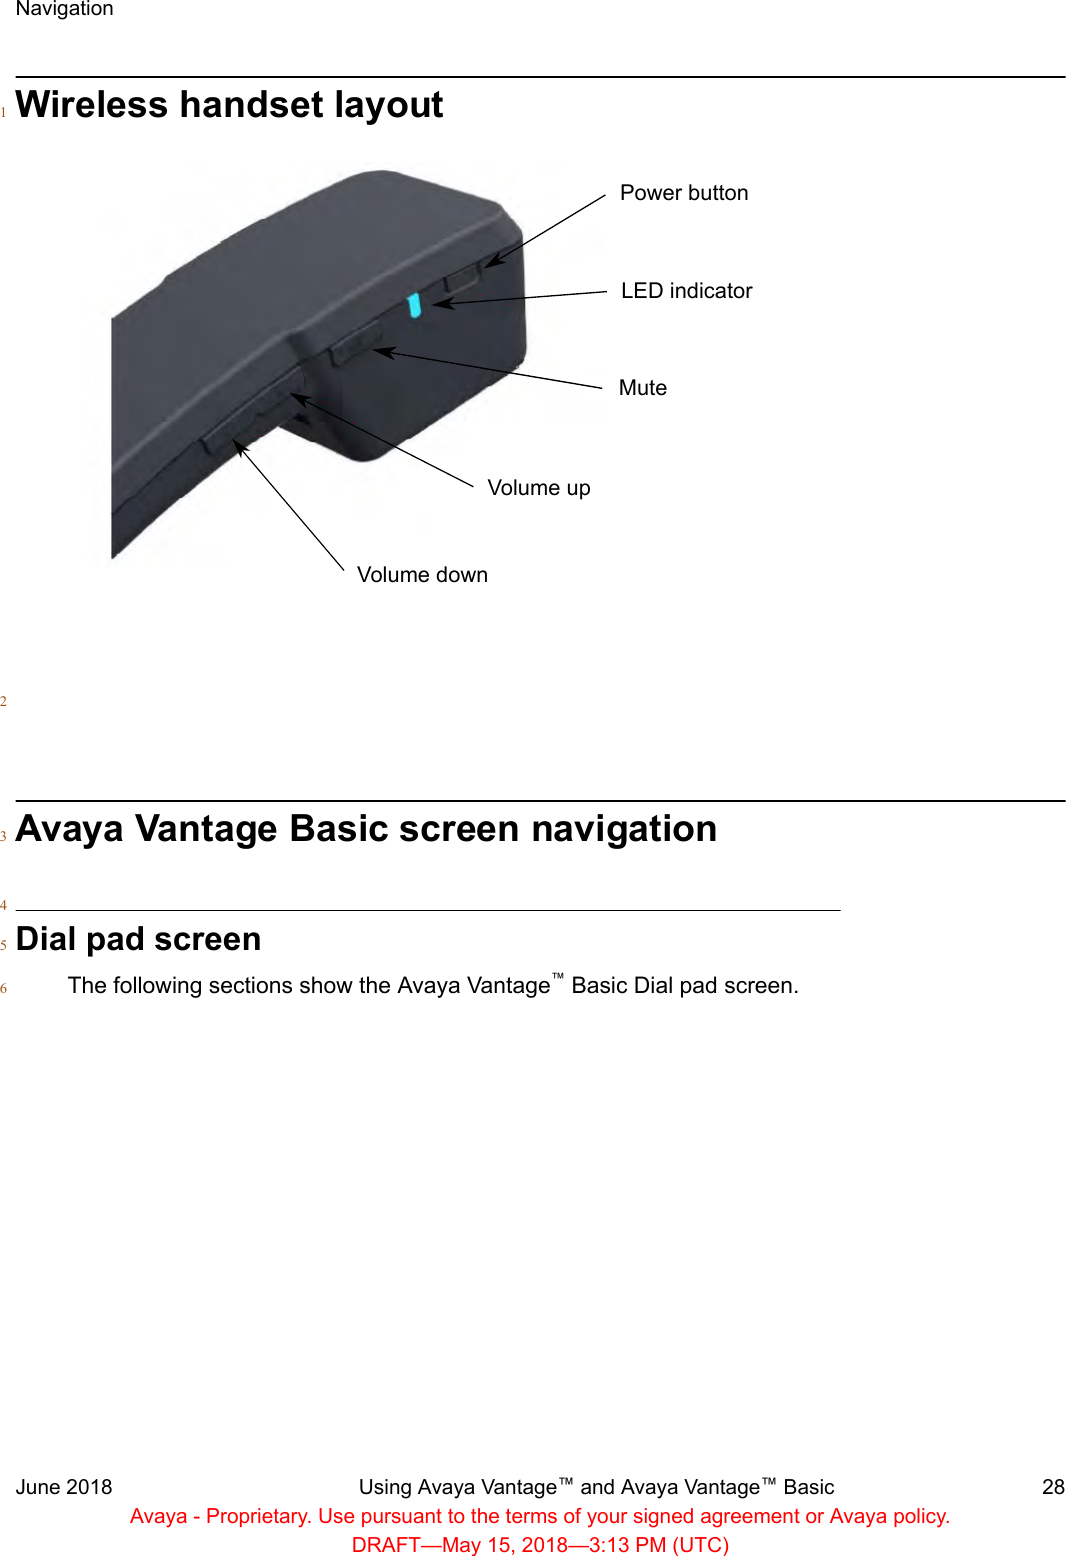 Wireless handset layout1Power buttonLED indicatorMuteVolume upVolume down2Avaya Vantage Basic screen navigation34Dial pad screen5The following sections show the Avaya Vantage™ Basic Dial pad screen.6NavigationJune 2018 Using Avaya Vantage™ and Avaya Vantage™ Basic 28Avaya - Proprietary. Use pursuant to the terms of your signed agreement or Avaya policy.DRAFT—May 15, 2018—3:13 PM (UTC)